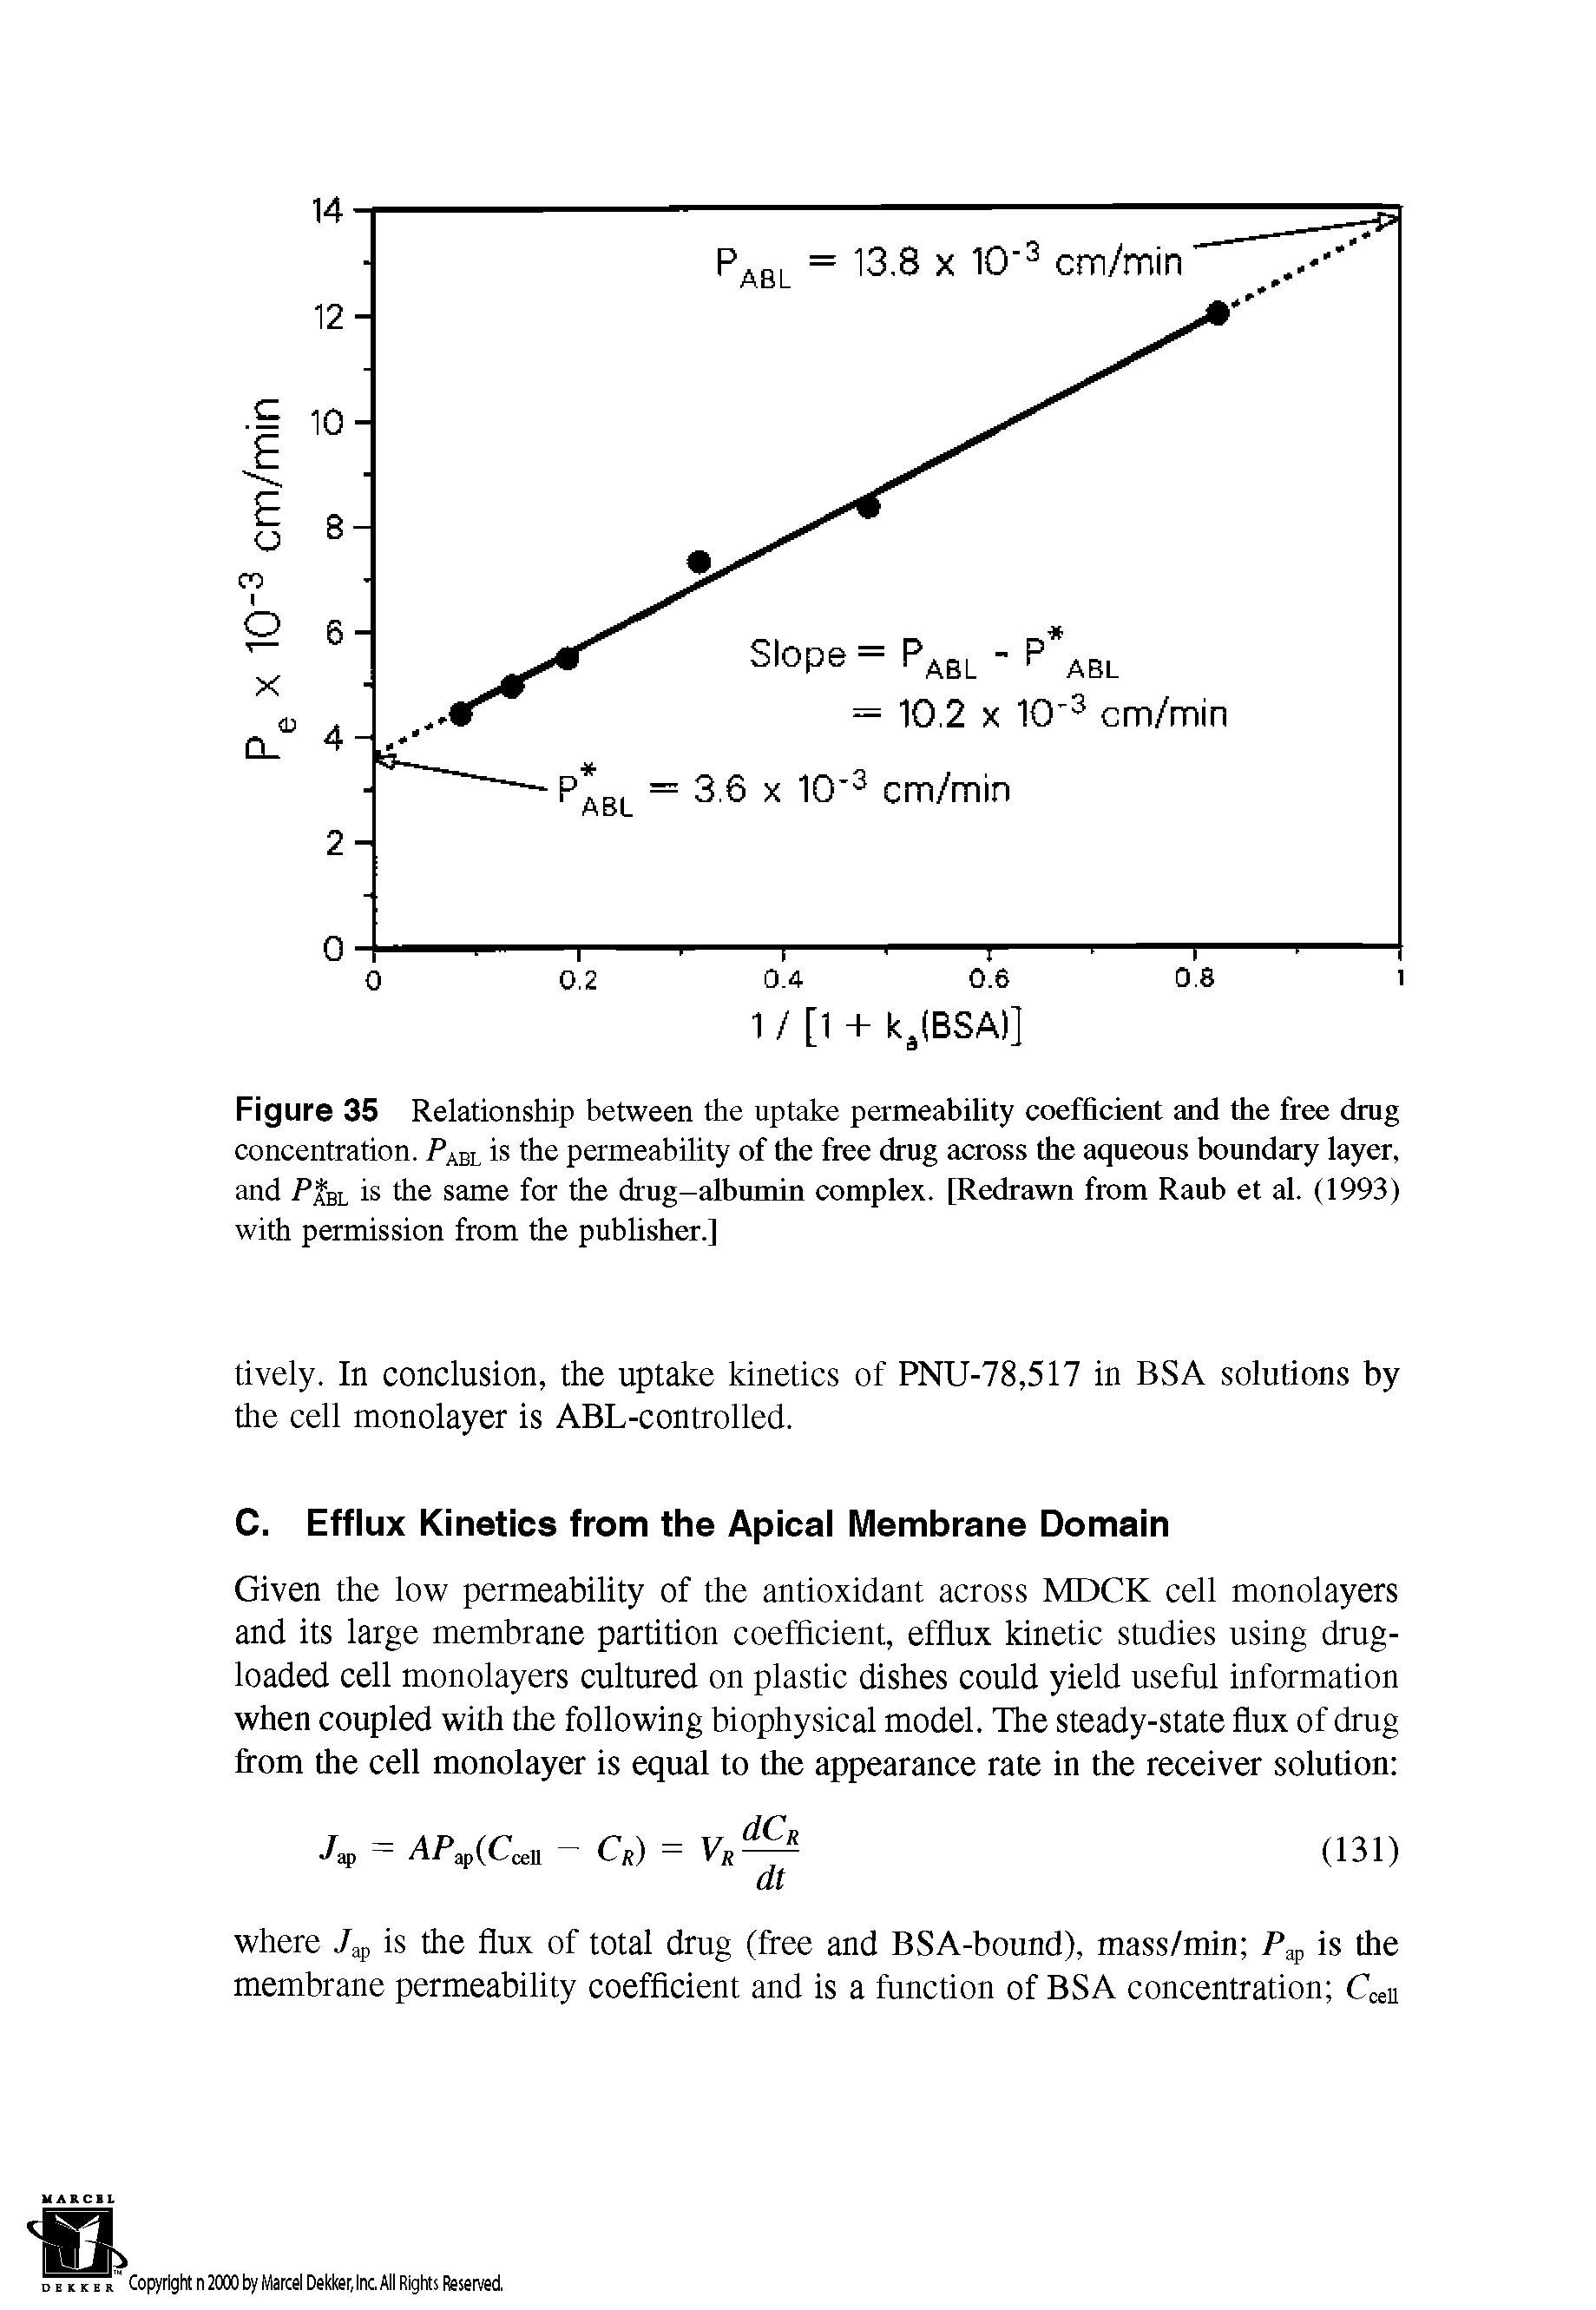 Figure 35 Relationship between the uptake permeability coefficient and the free drug concentration. PAEL is the permeability of the free drug across the aqueous boundary layer, and P BL is the same for the drug-albumin complex. [Redrawn from Raub et al. (1993) with permission from the publisher.]...